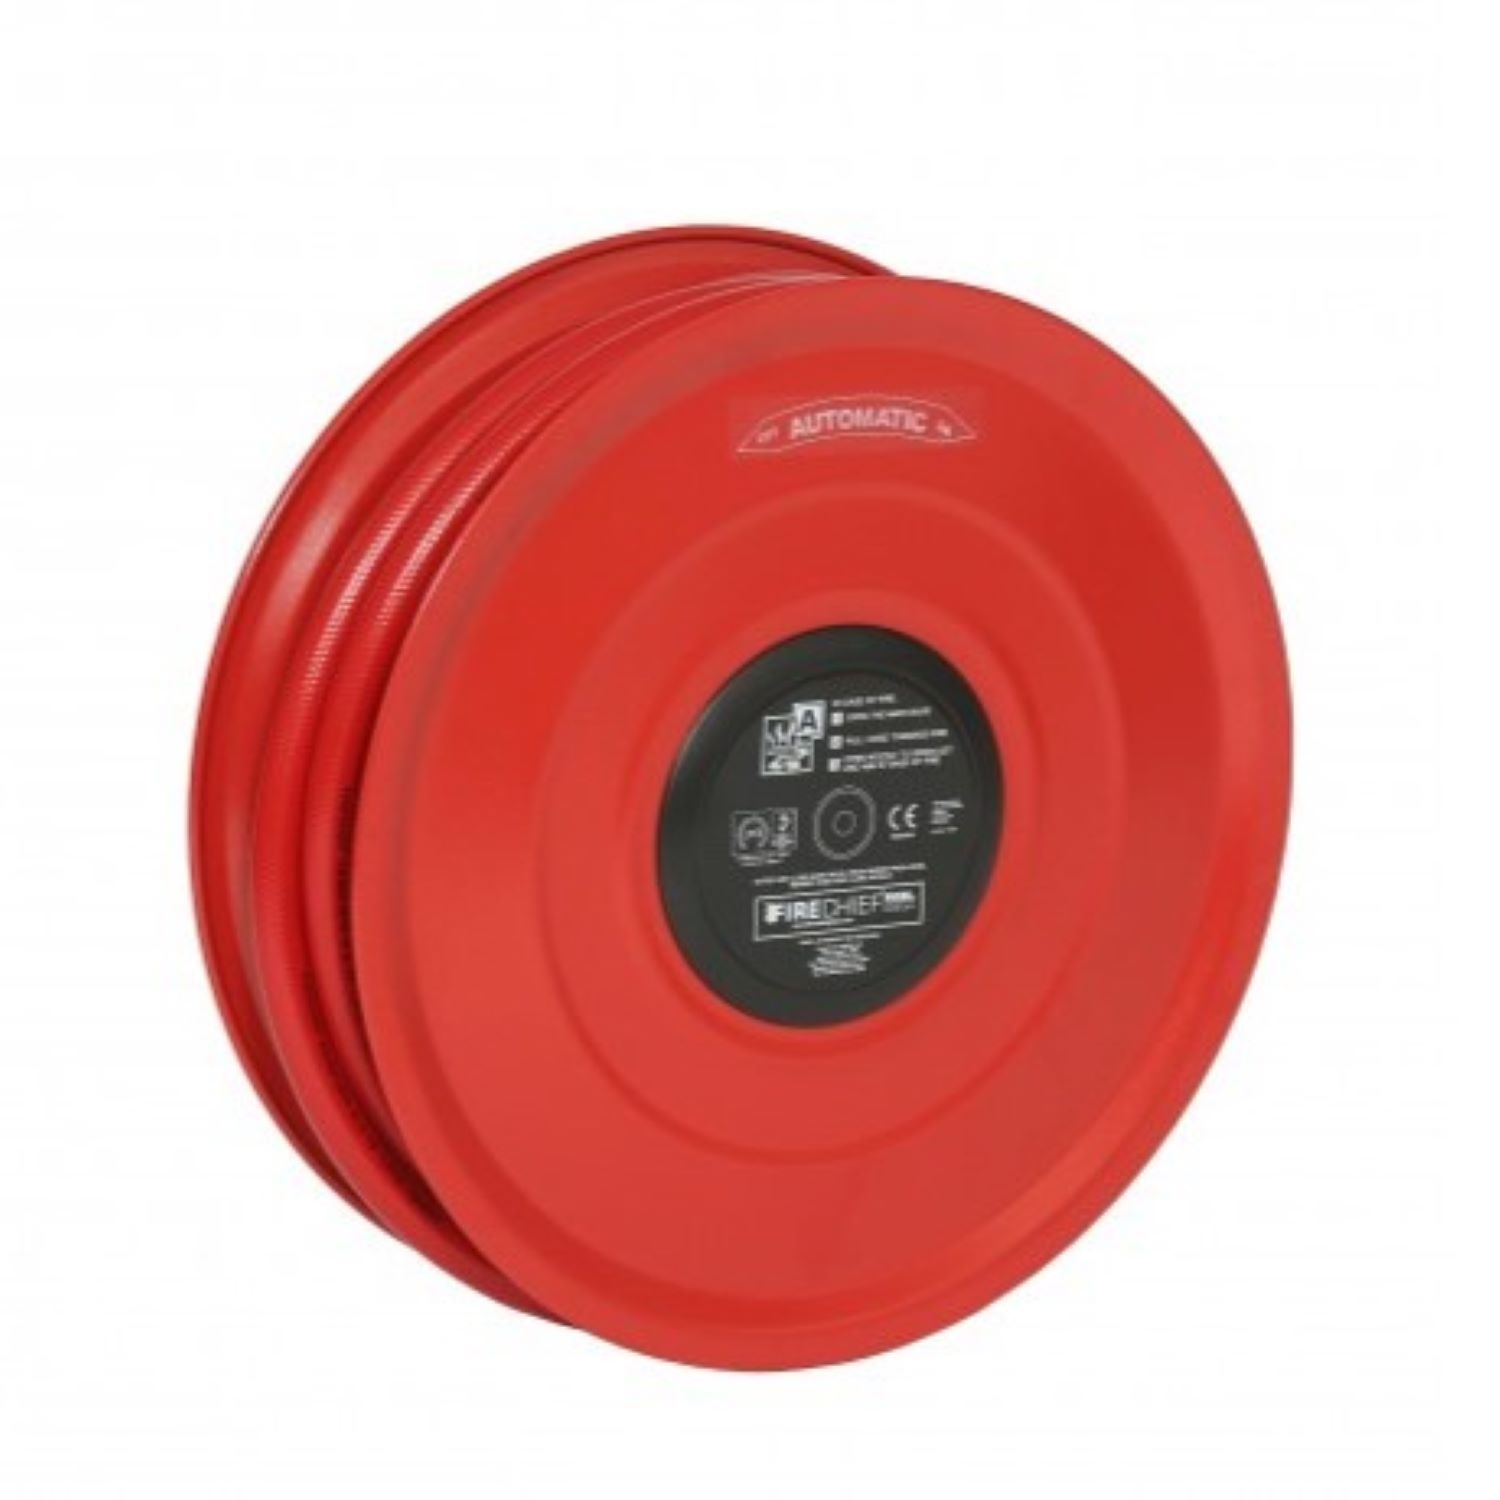 https://www.safelincs.co.uk/shopimages/products/high/fixed-fire-hose-reel-front.jpg